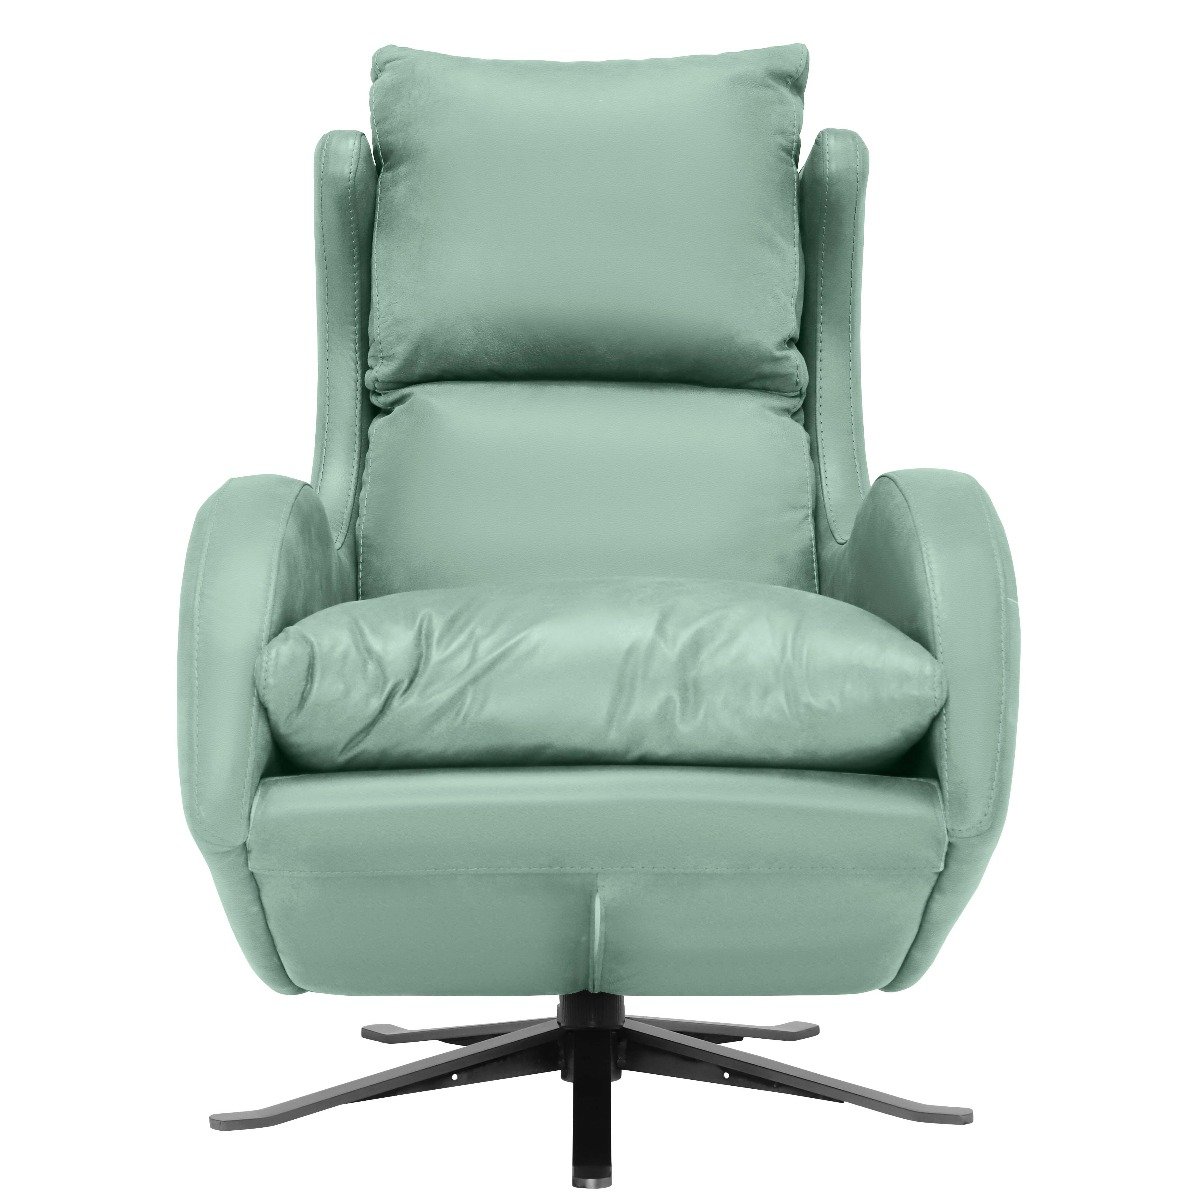 Lenny Rocking & Swivelling Armchair, Green Leather | Barker & Stonehouse